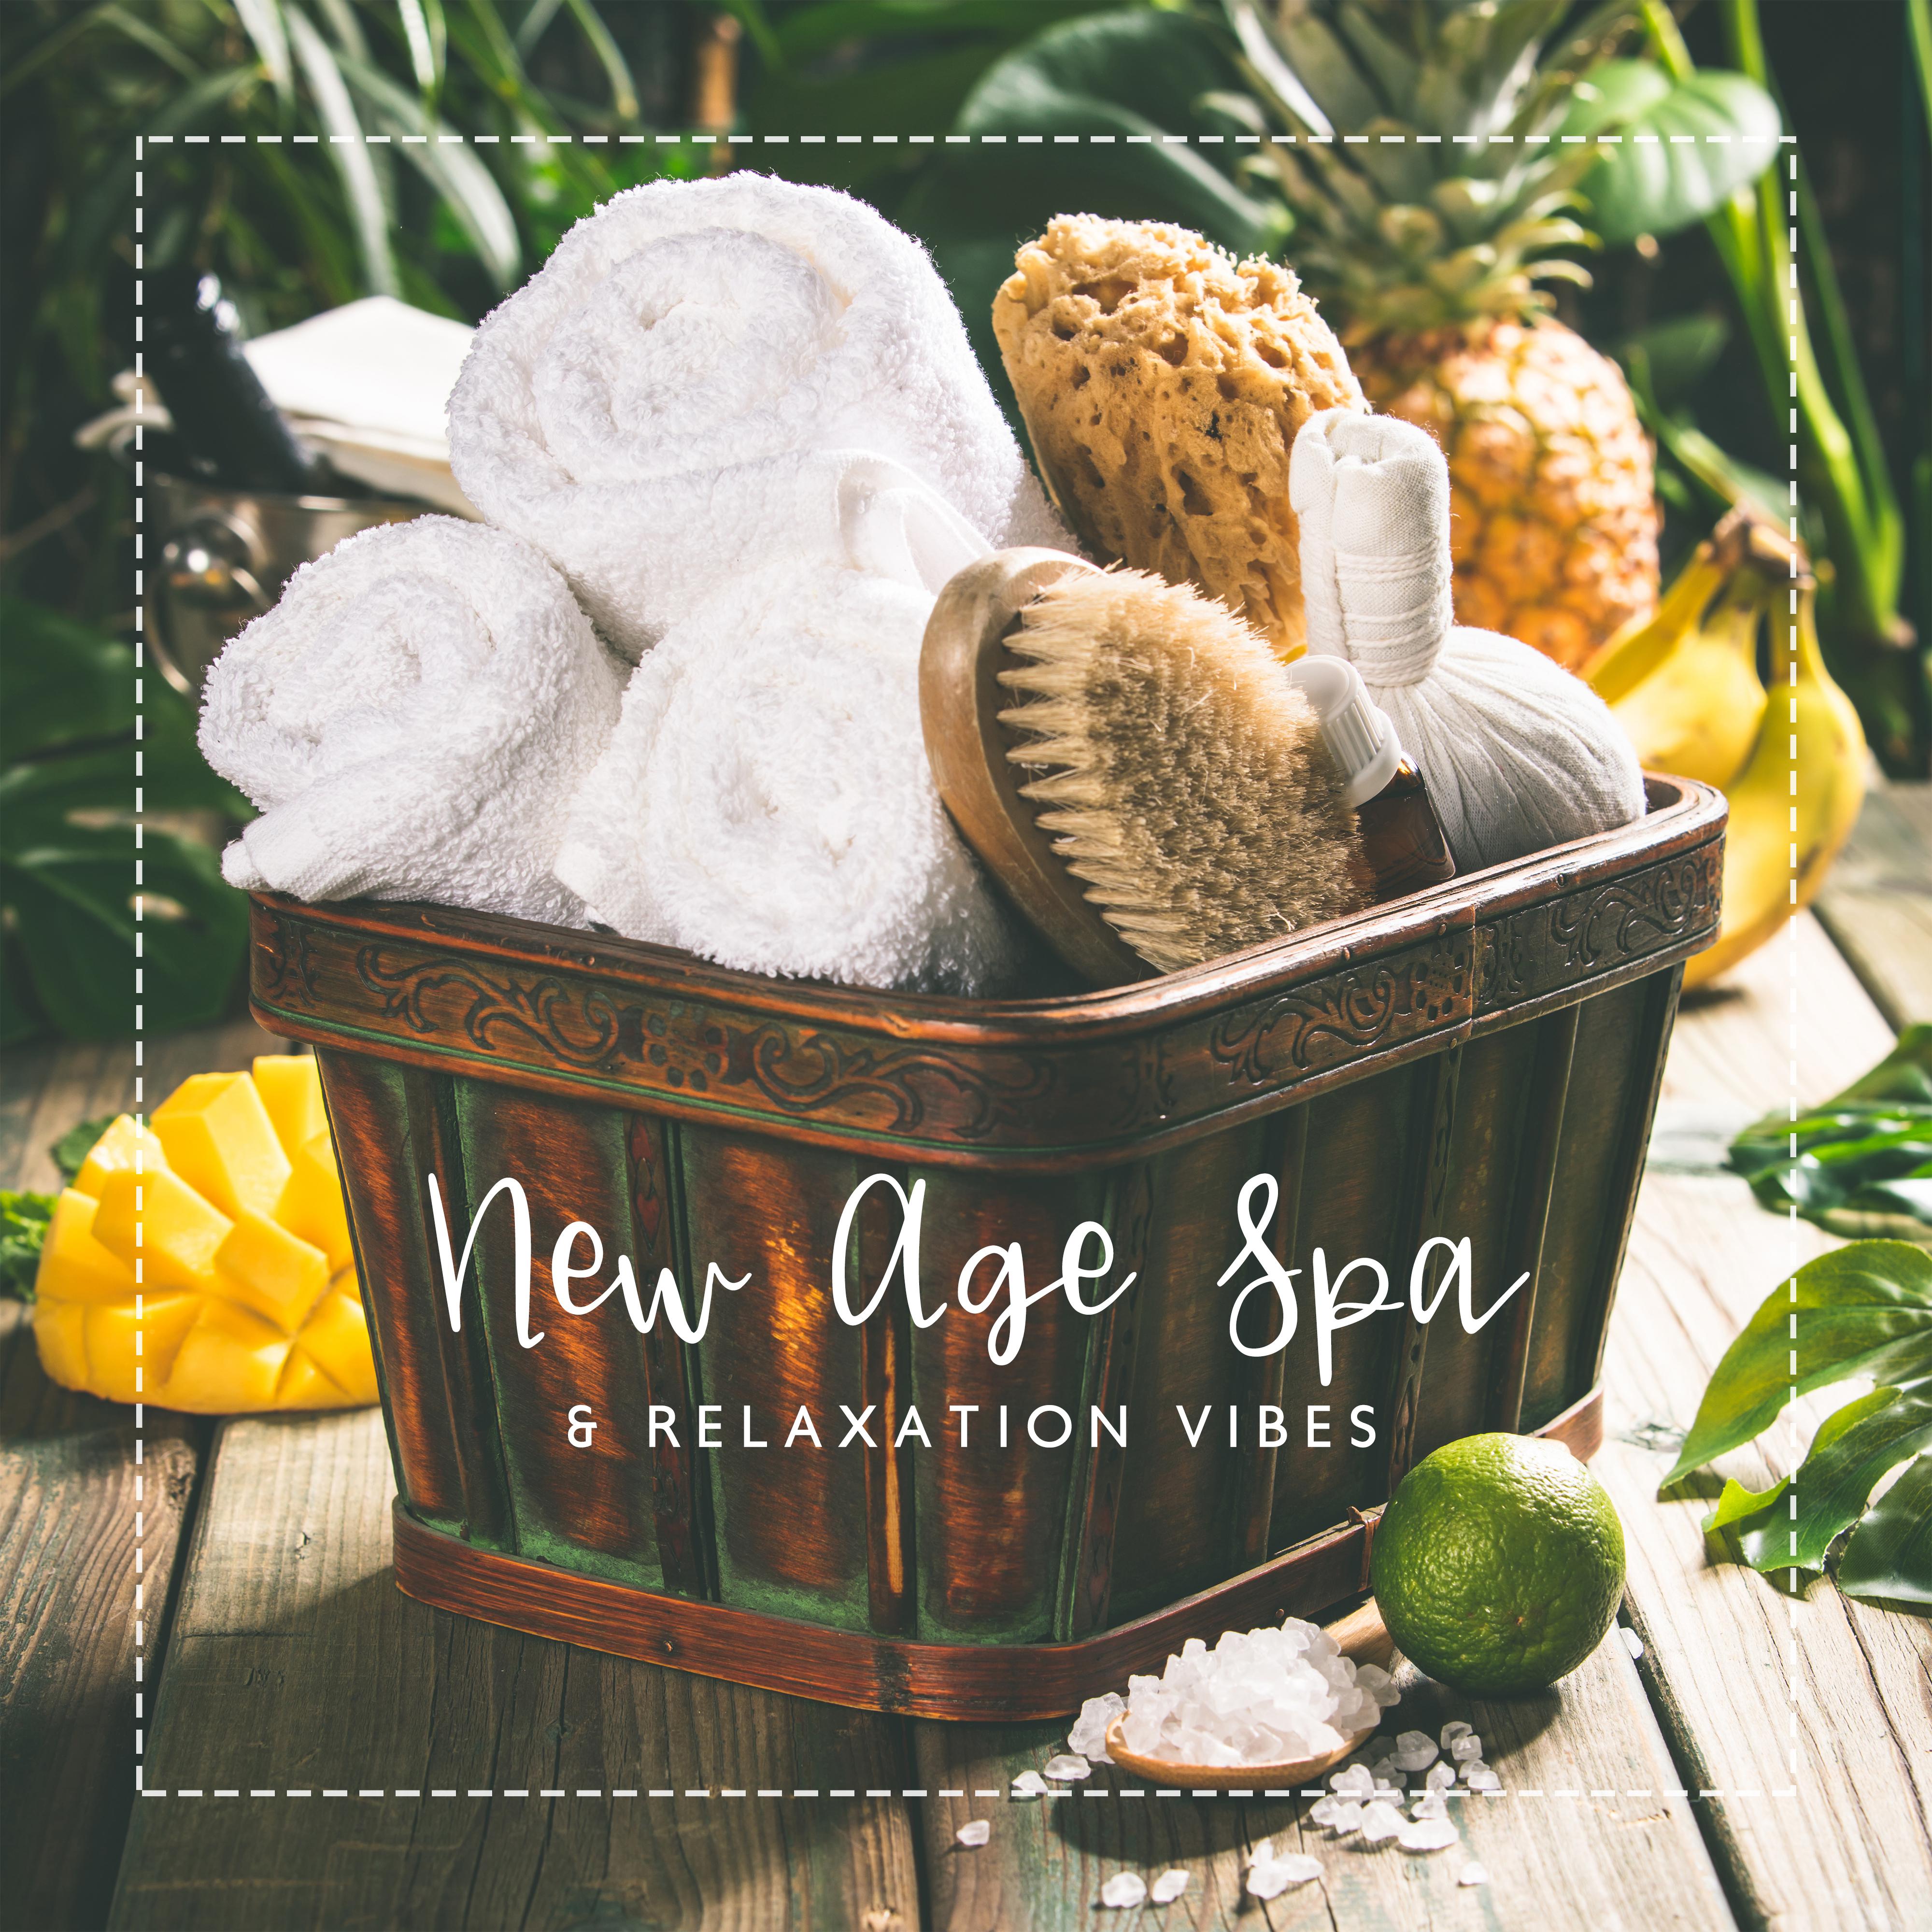 New Age Spa & Relaxation Vibes